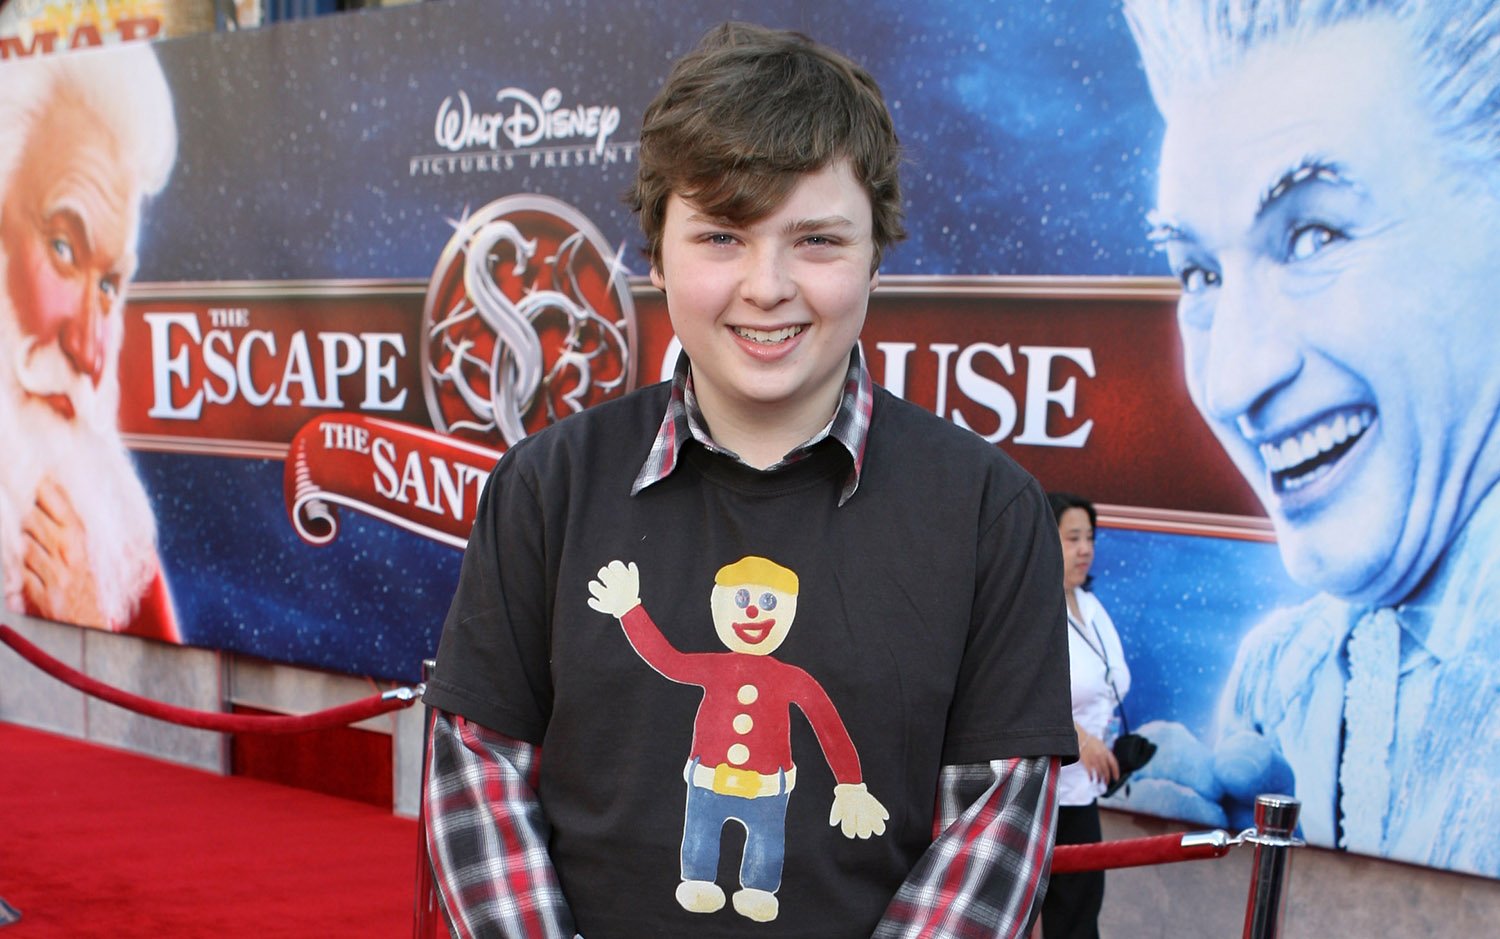 Spencer Breslin, who plays Curtis the Elf, poses for a photo in a plaid shirt underneath a gingerbread man tee at The Santa Clause 3 premiere